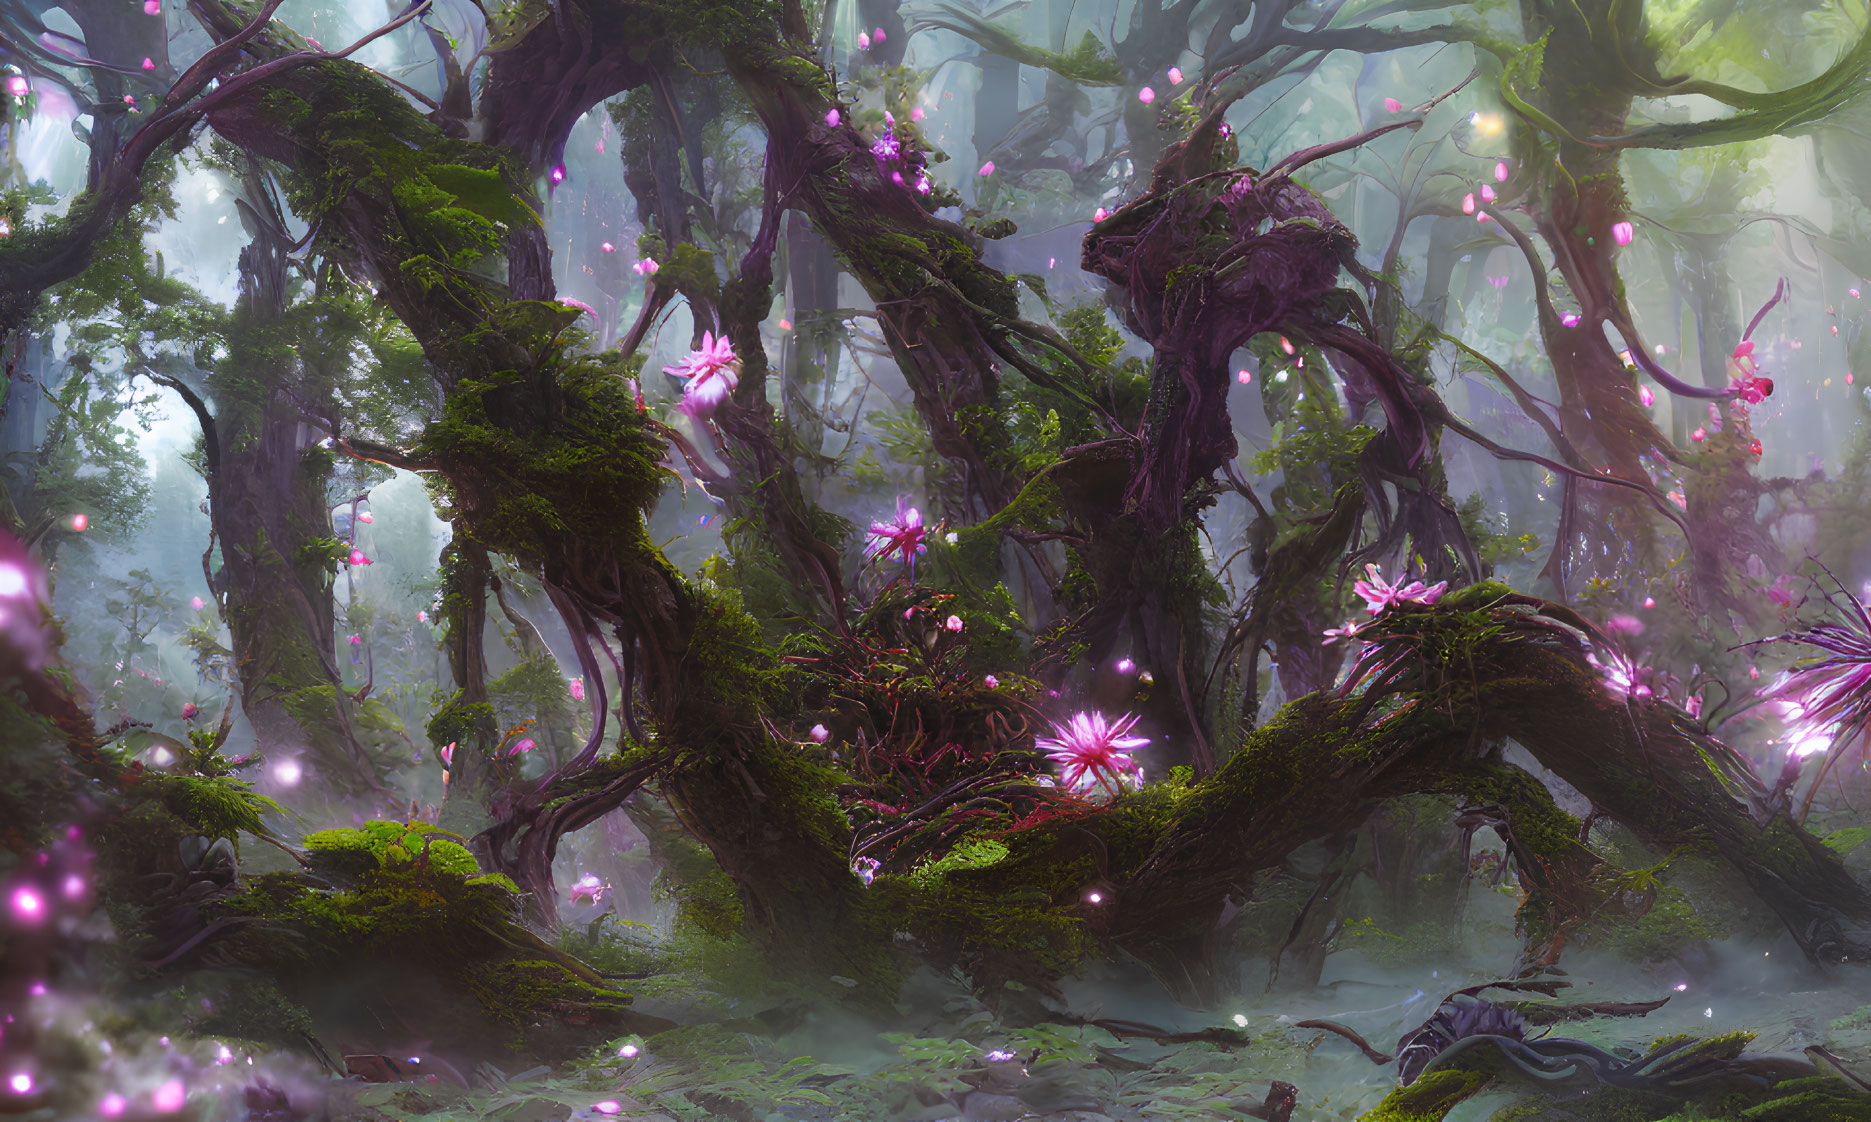 Twisted moss-covered trees in enchanted forest with glowing pink flowers